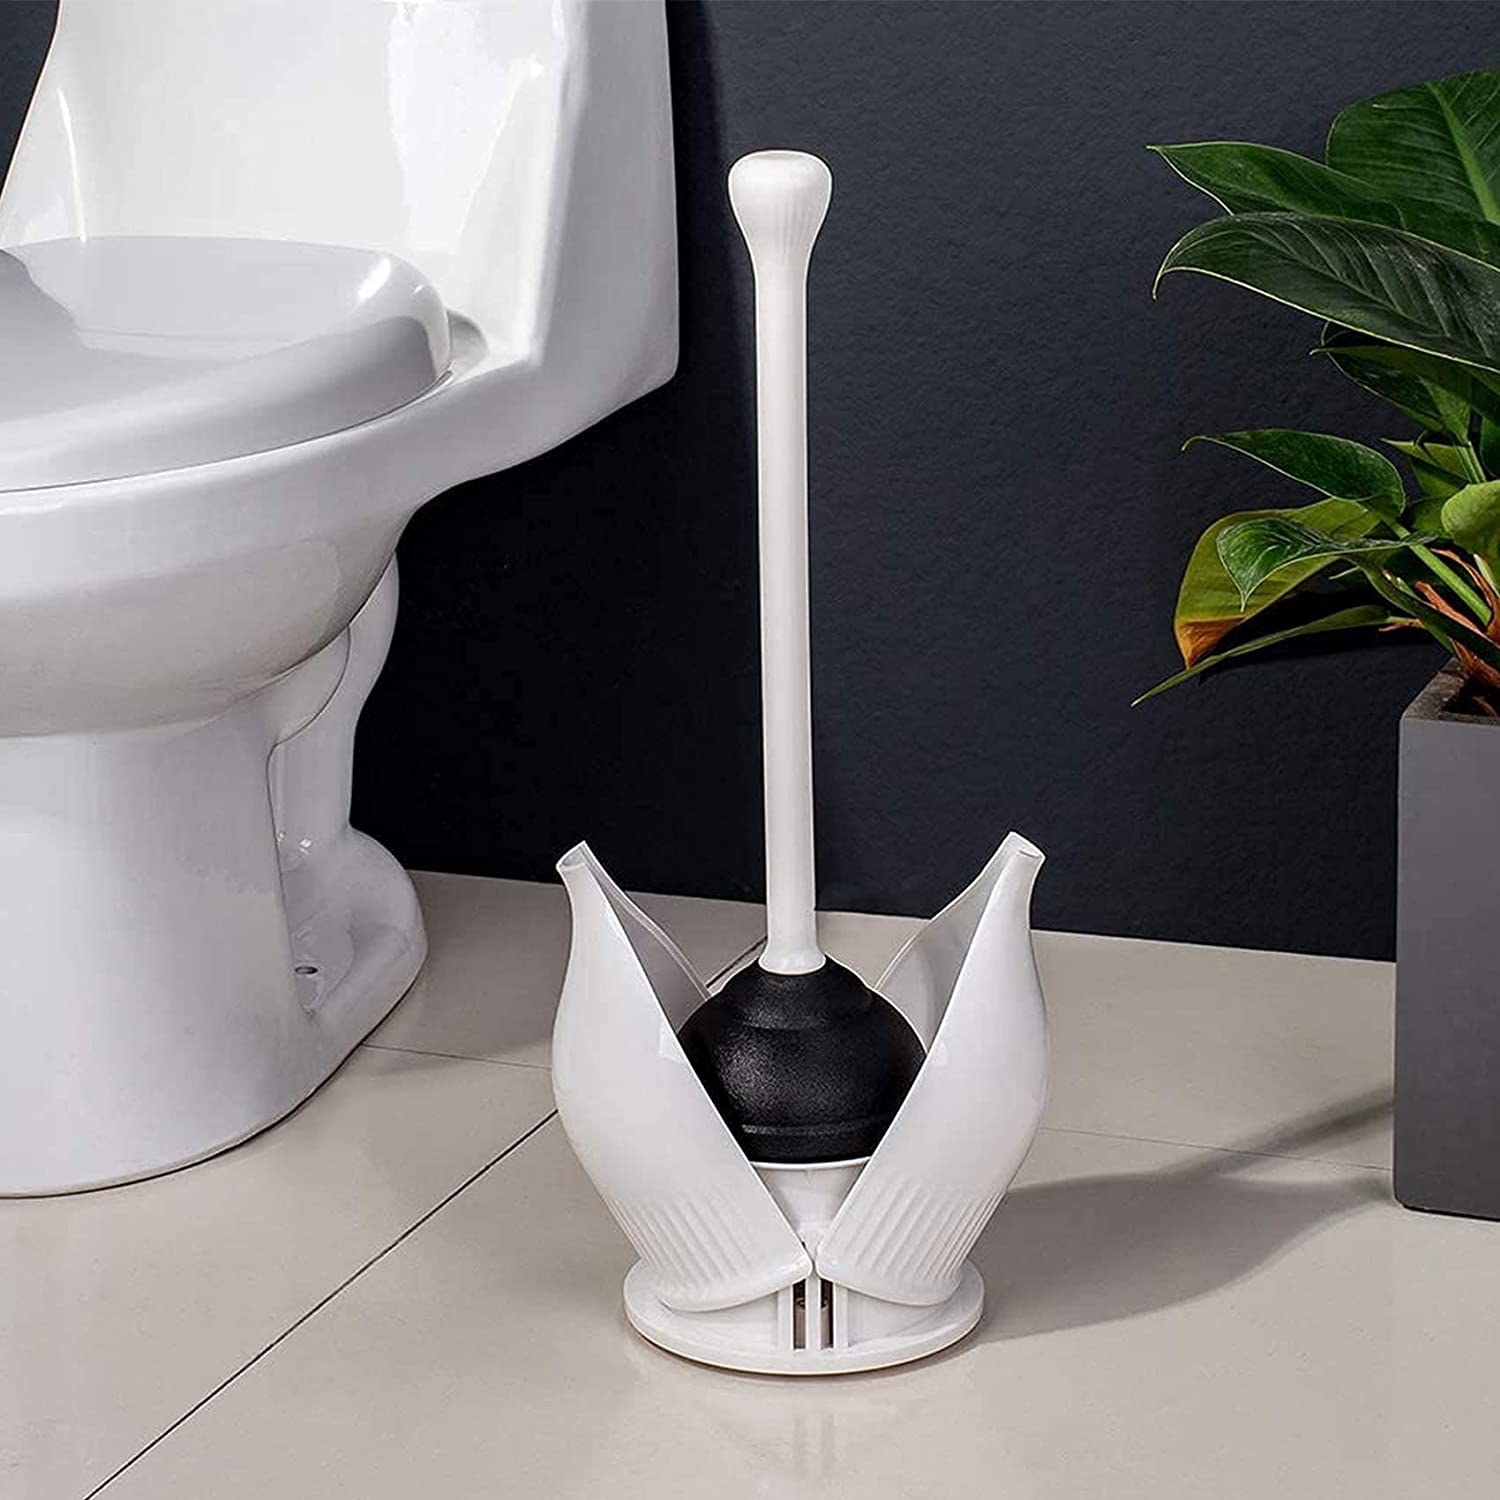 A hideaway toilet plunger and caddy